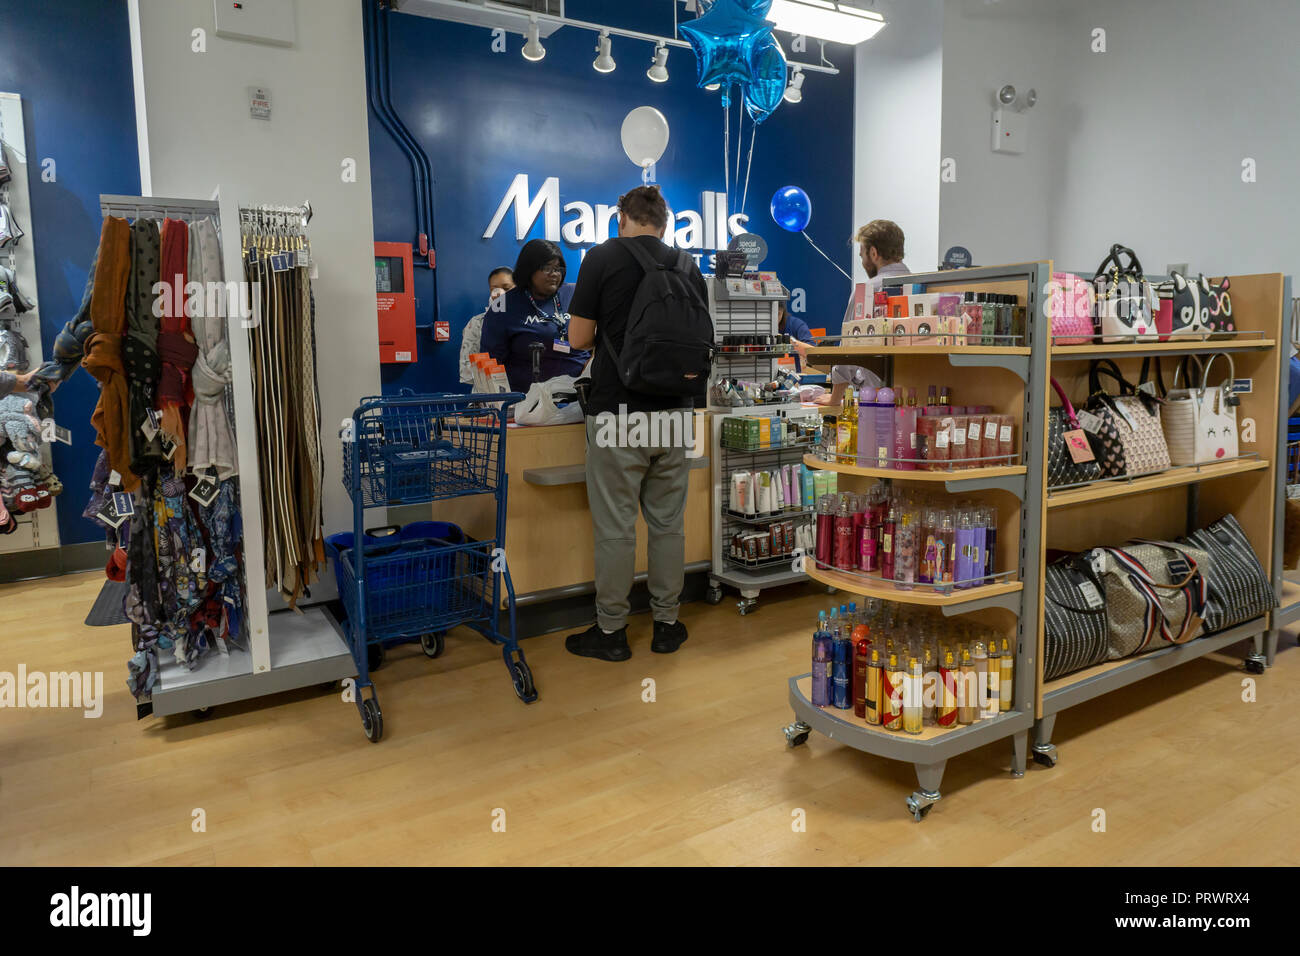 New York, USA. 4th October, 2018. Check-out in the brand new off-price Marshalls store in the Lower East Side neighborhood of in New York during it's grand opening on Thursday, October 4, 2018. Marshalls is a brand of the TJX Companies, parent of Marshalls, T. J. Maxx, HomeGoods and other brands. TJX Companies recently reported comps that grew 6% over year citing increased traffic in its Marmaxx division (Marshalls, TX Maxx). (Â© Richard B. Levine) Credit: Richard Levine/Alamy Live News Stock Photo